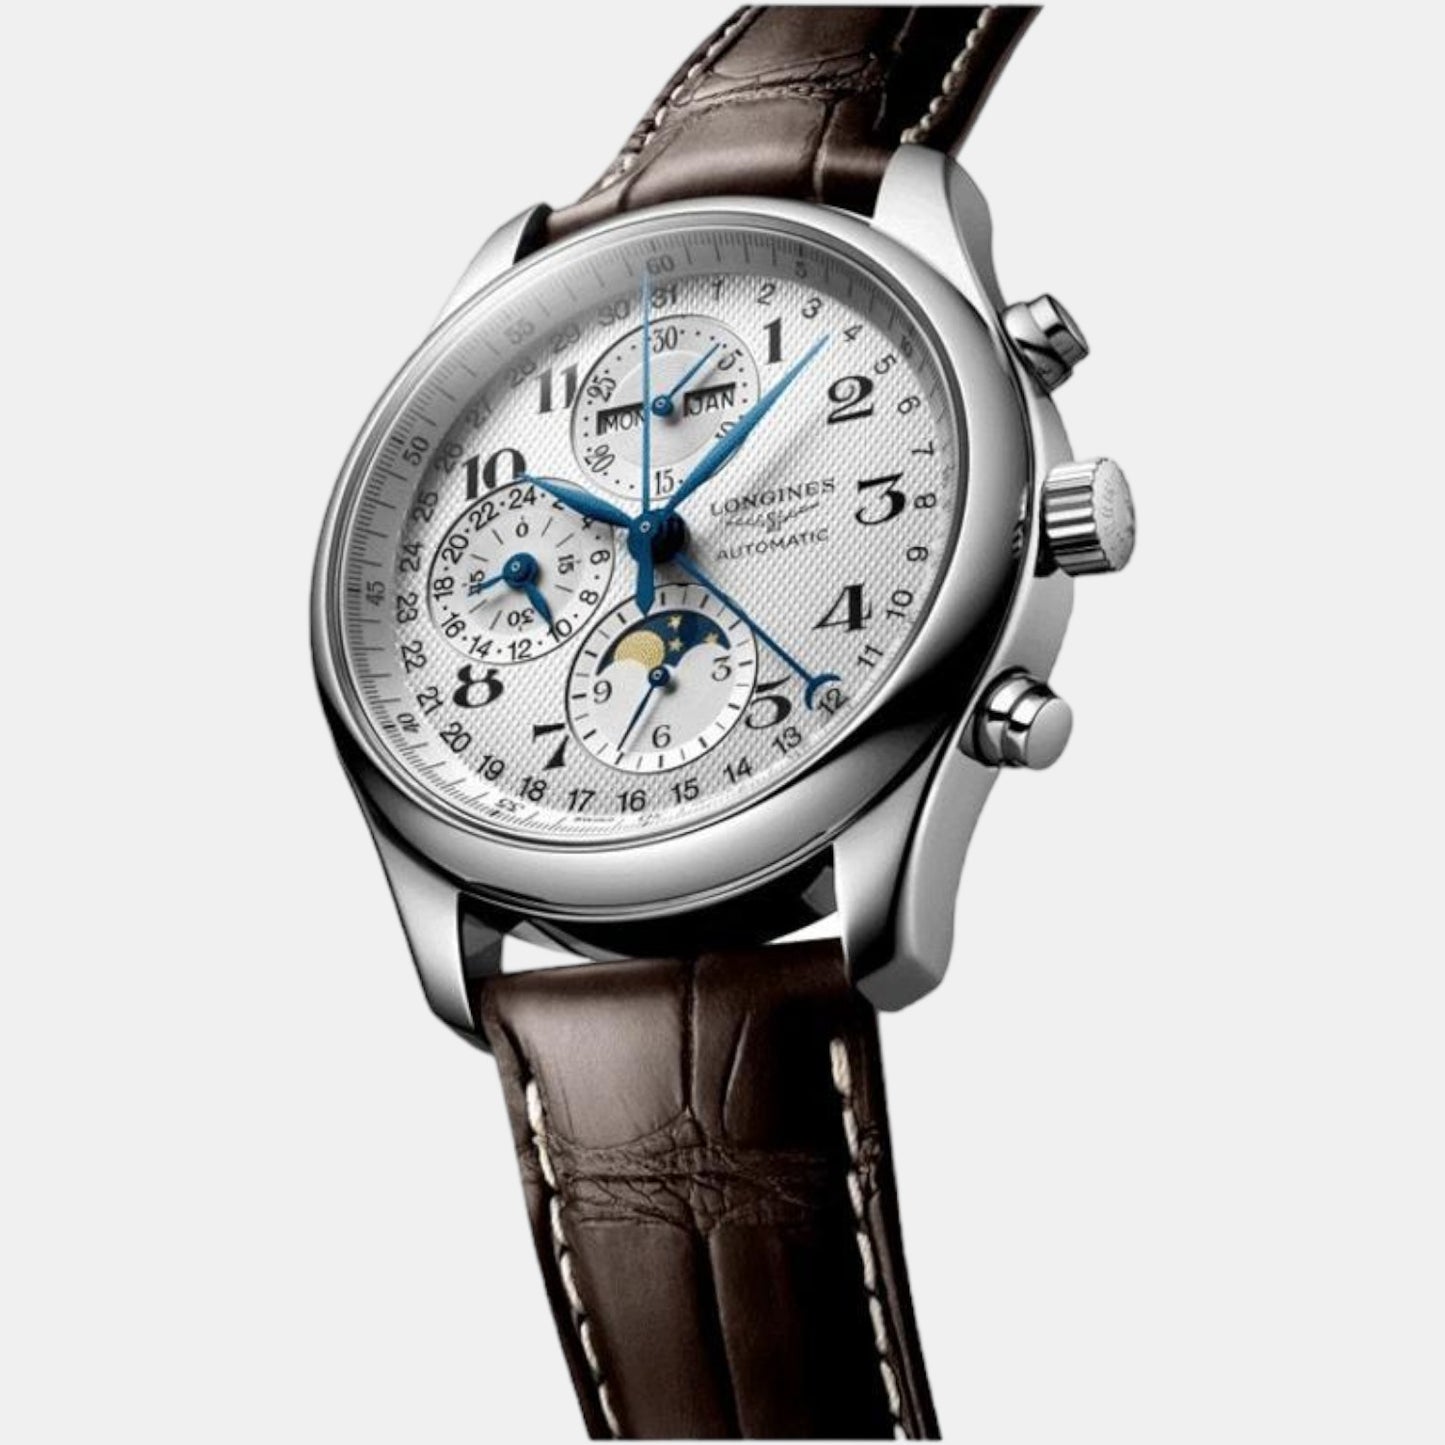 The Longines Master Male Leather Automatic Chronograph Watch L27734783